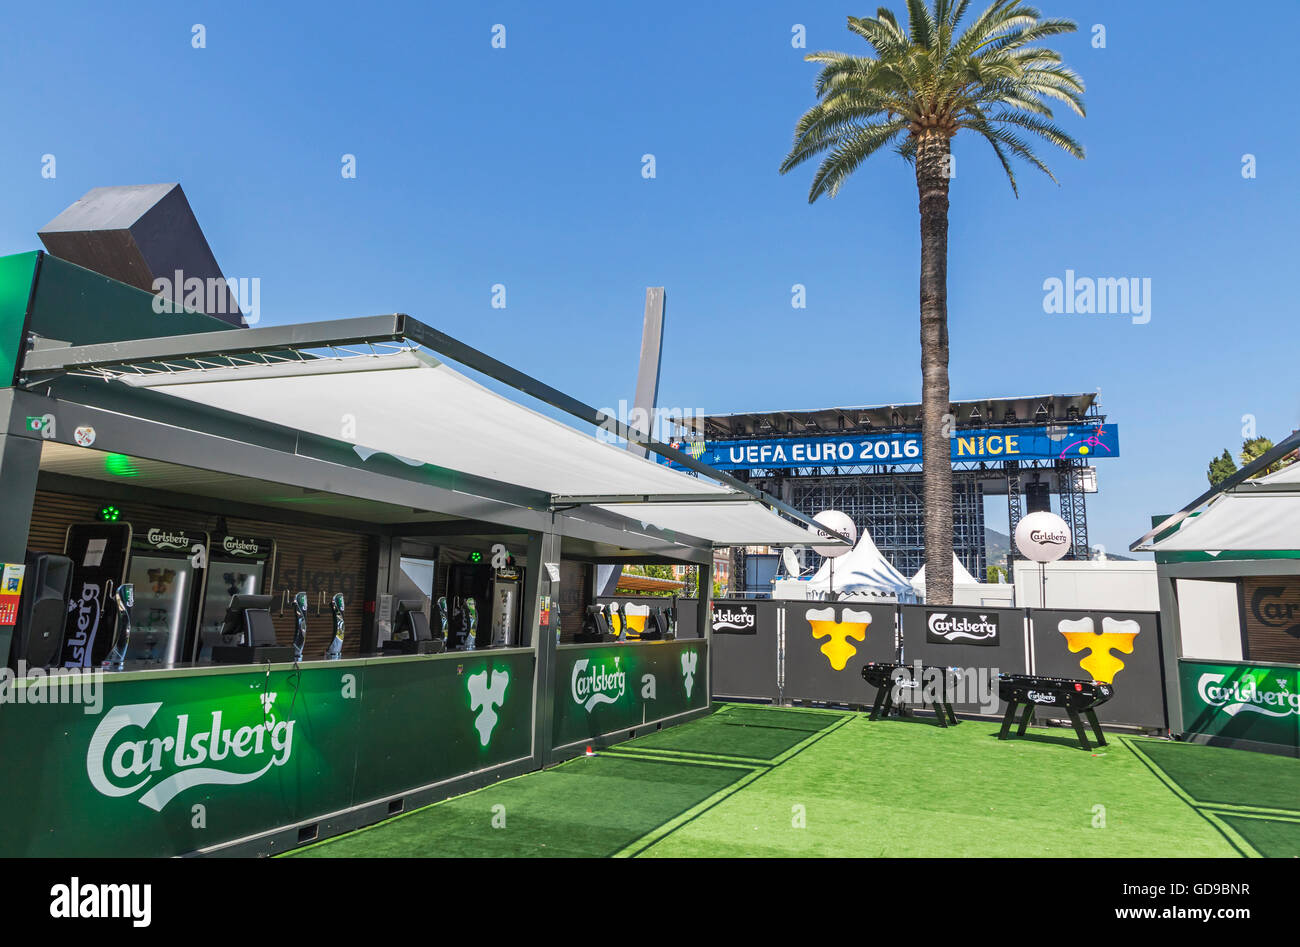 NICE, FRANCE - JUNE 22, 2016: Official fanzone of UEFA EURO 2016 at Albert I Garden in City of Nice, France Stock Photo